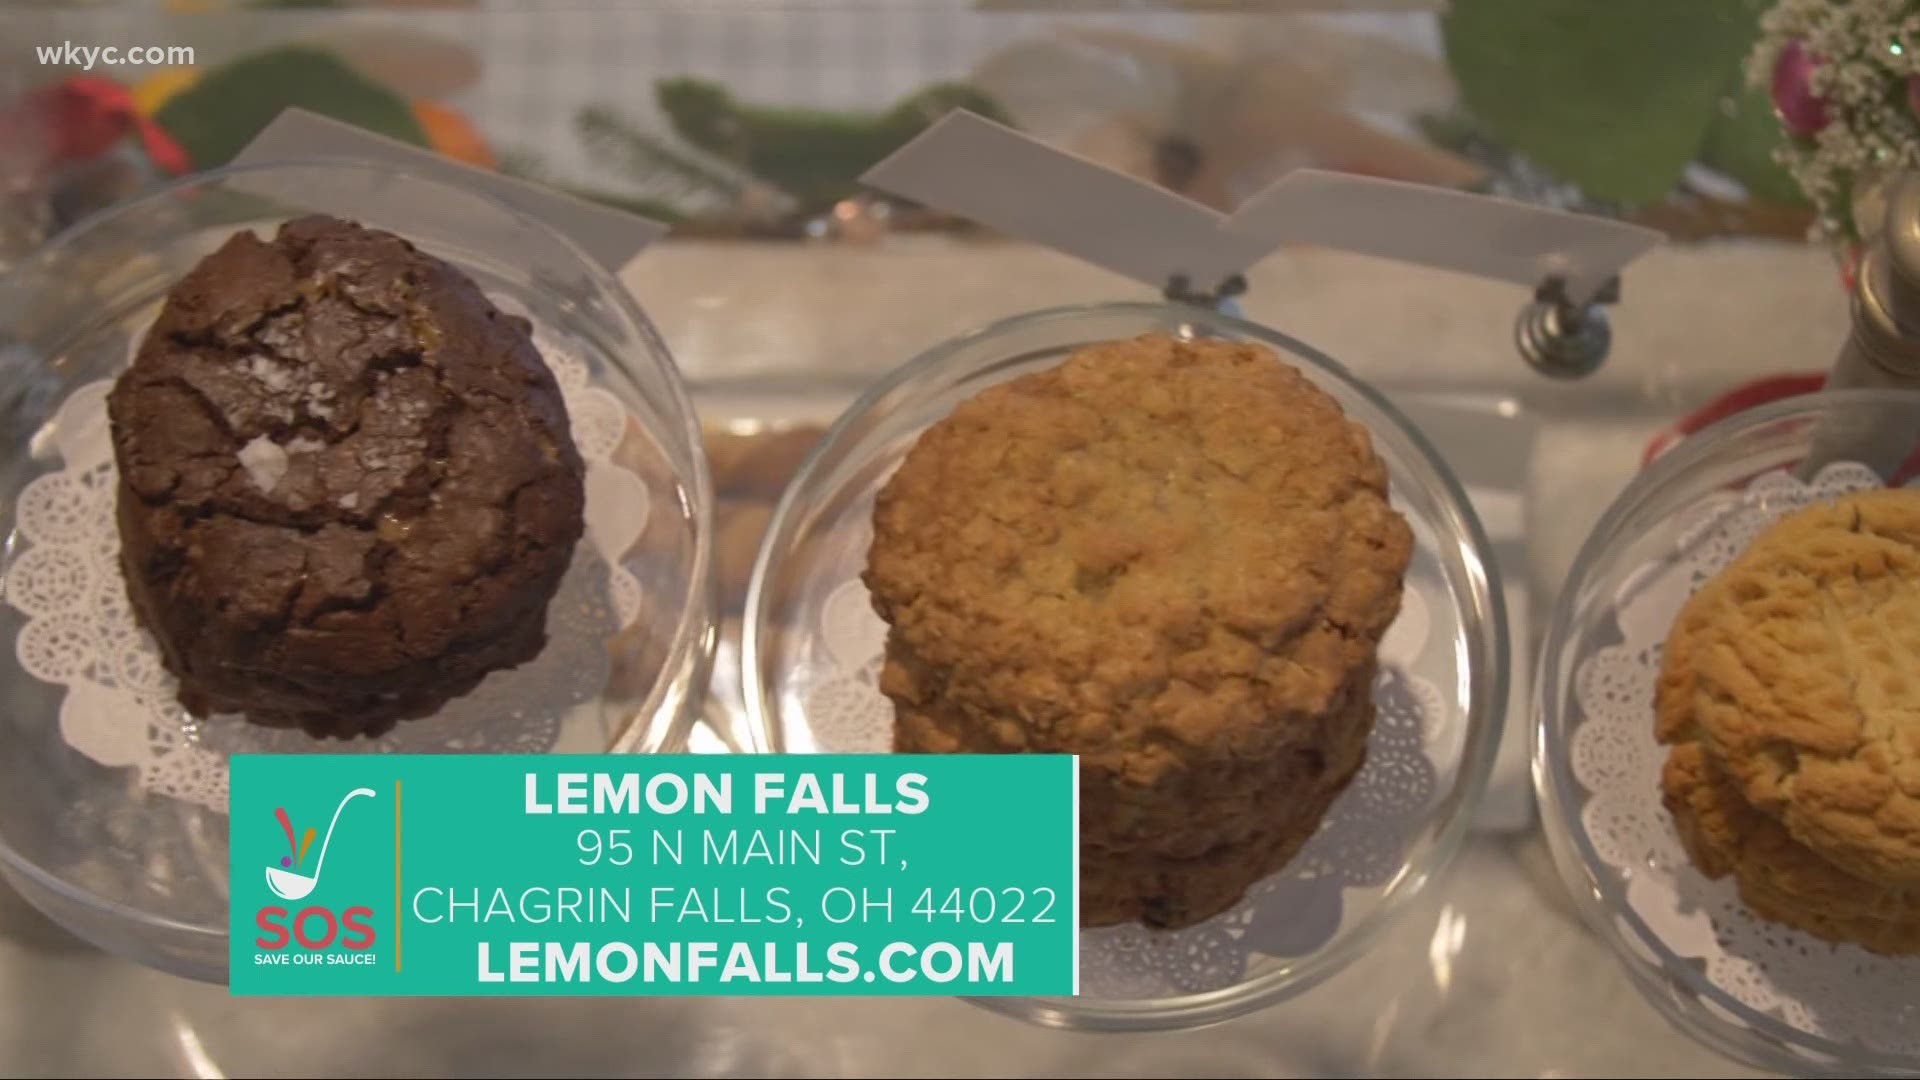 We're highlighting Lemon Falls in Chagrin Falls as part of the 'Save Our Sauce' campaign to show support for Northeast Ohio restaurants amid the COVID-19 pandemic.